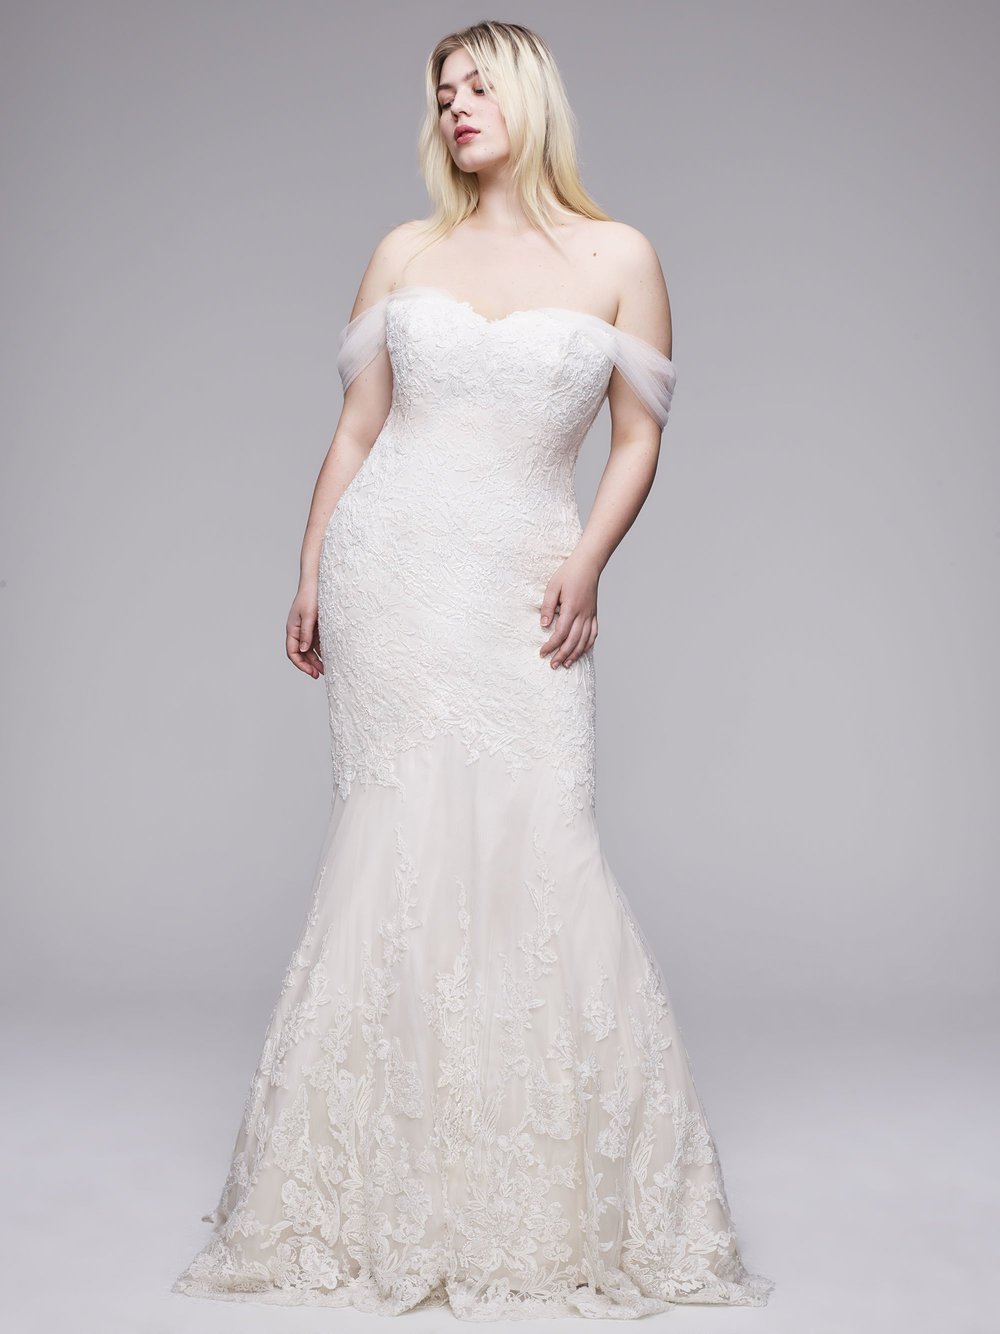 The Raven Plus Size Wedding Gown from Curve Couture by Anne Barge